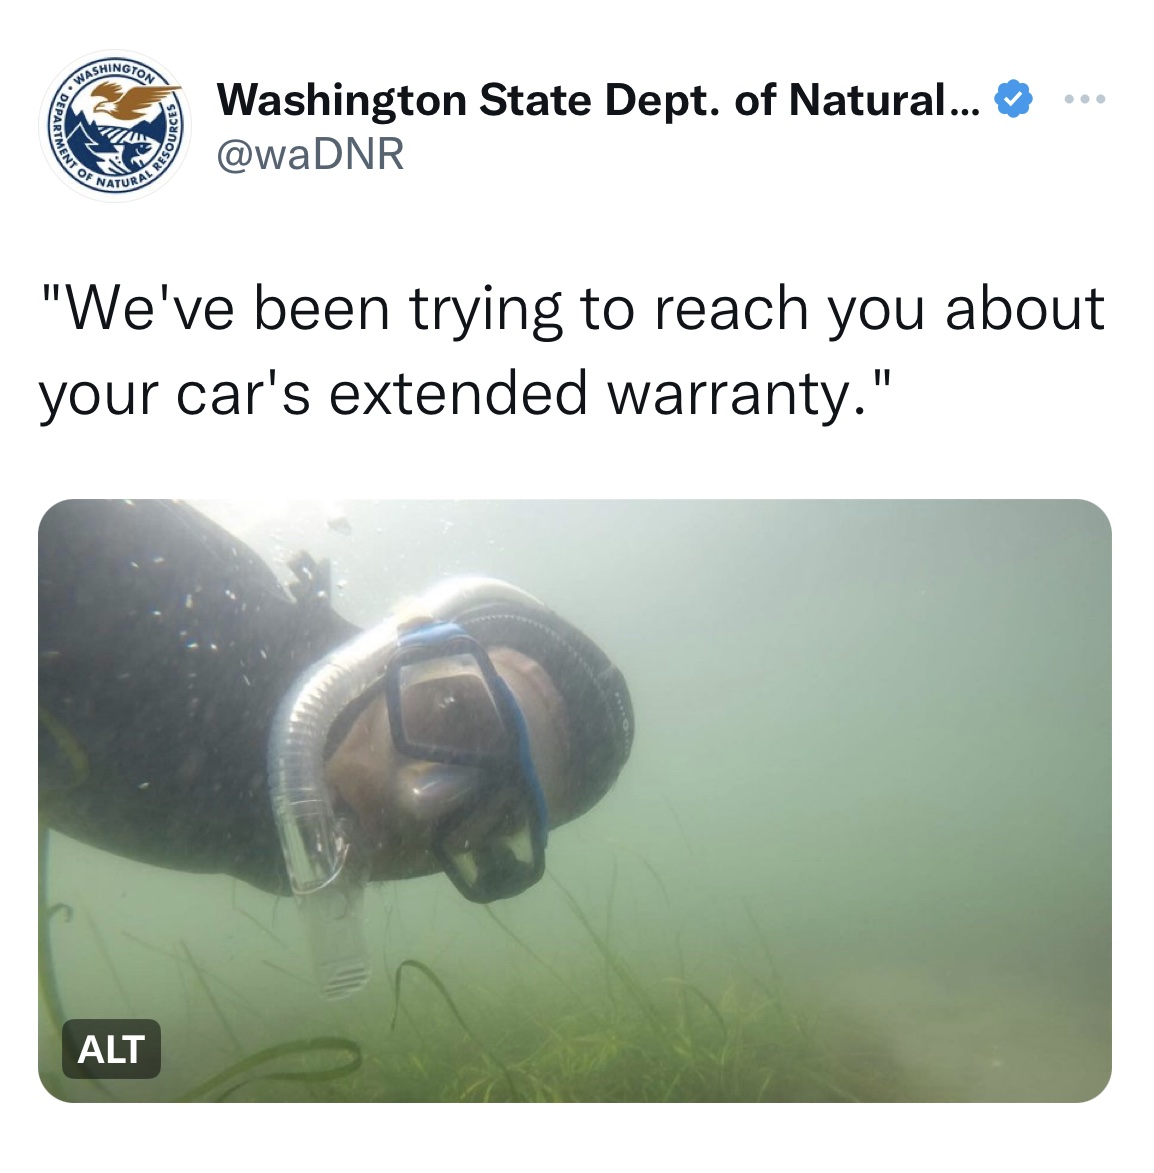 Washington Department of Natural Resources tweets - water - Ment Of Gton All Natural Resou Alt Washington State Dept. of Natural... "We've been trying to reach you about your car's extended warranty."